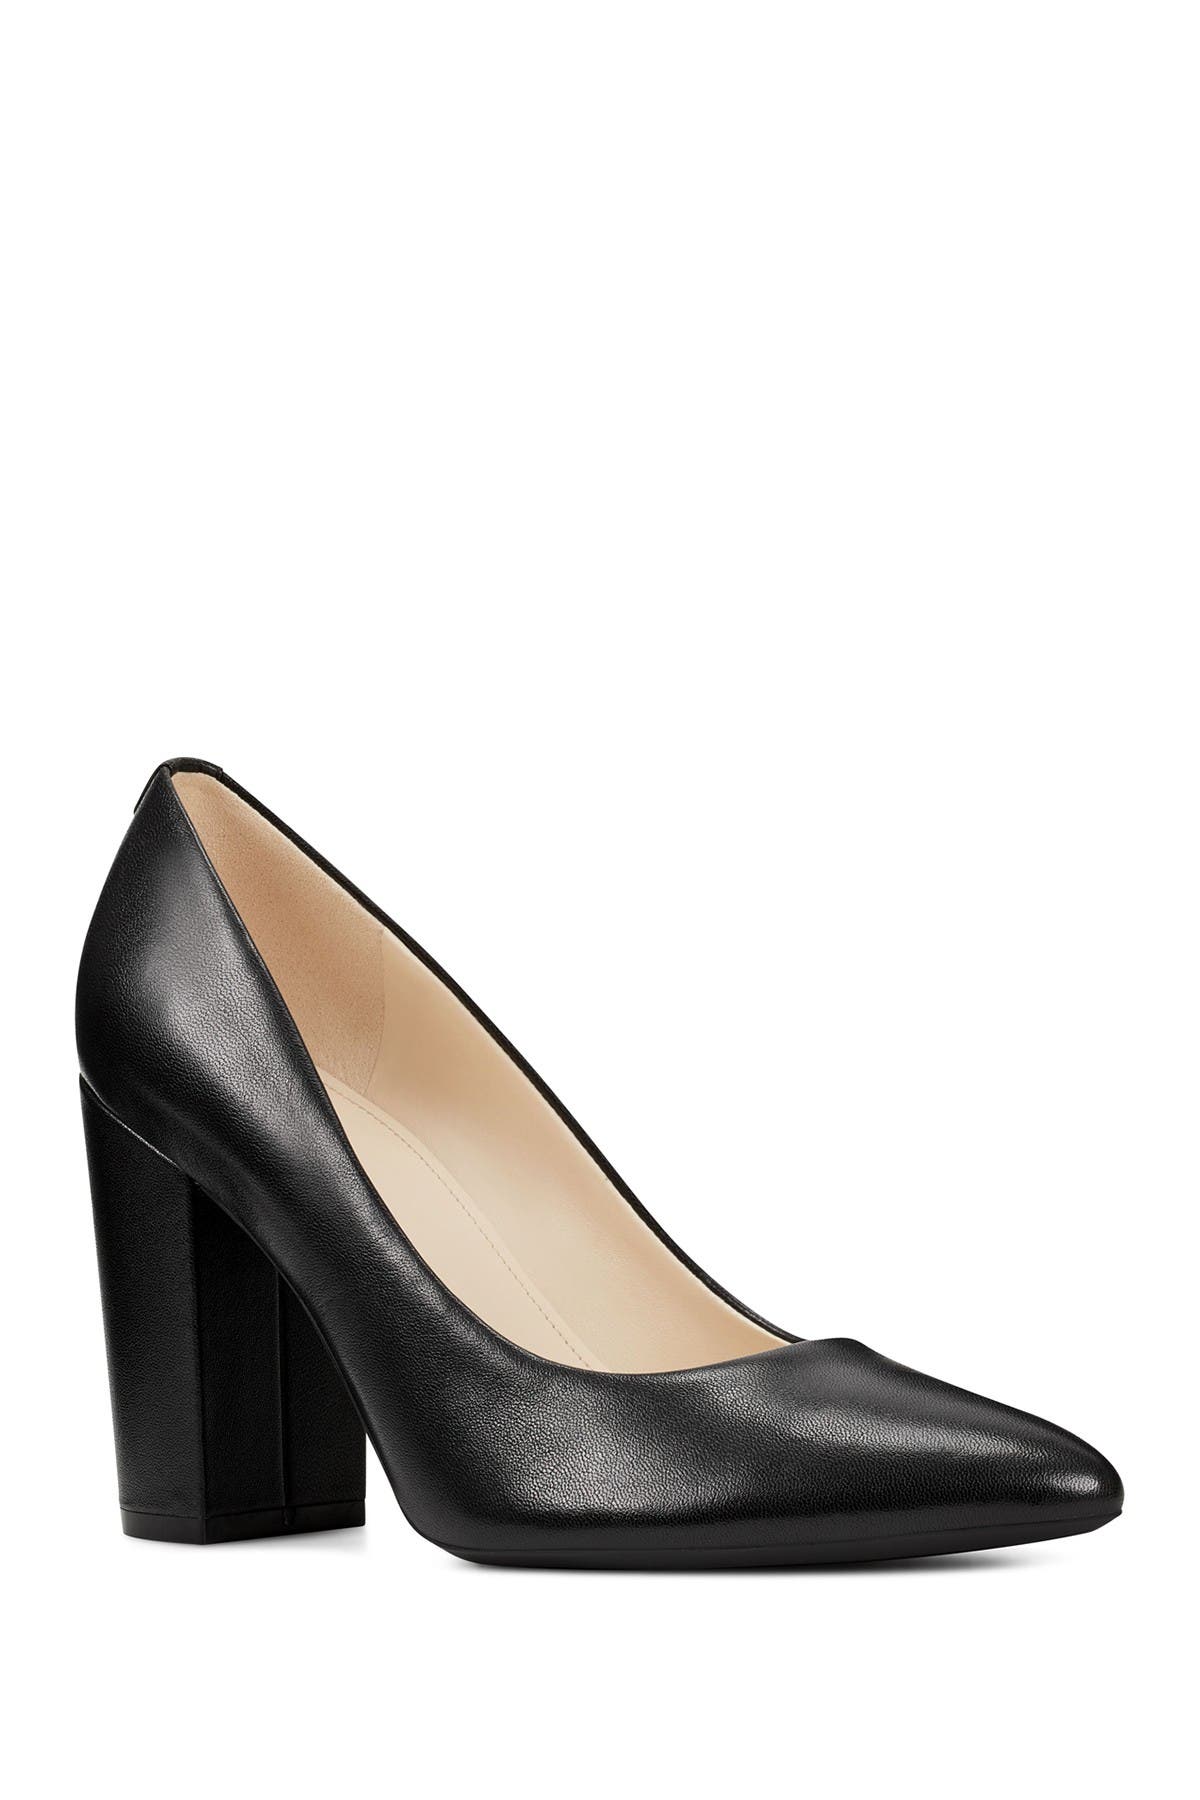 nine west pointy toe pumps